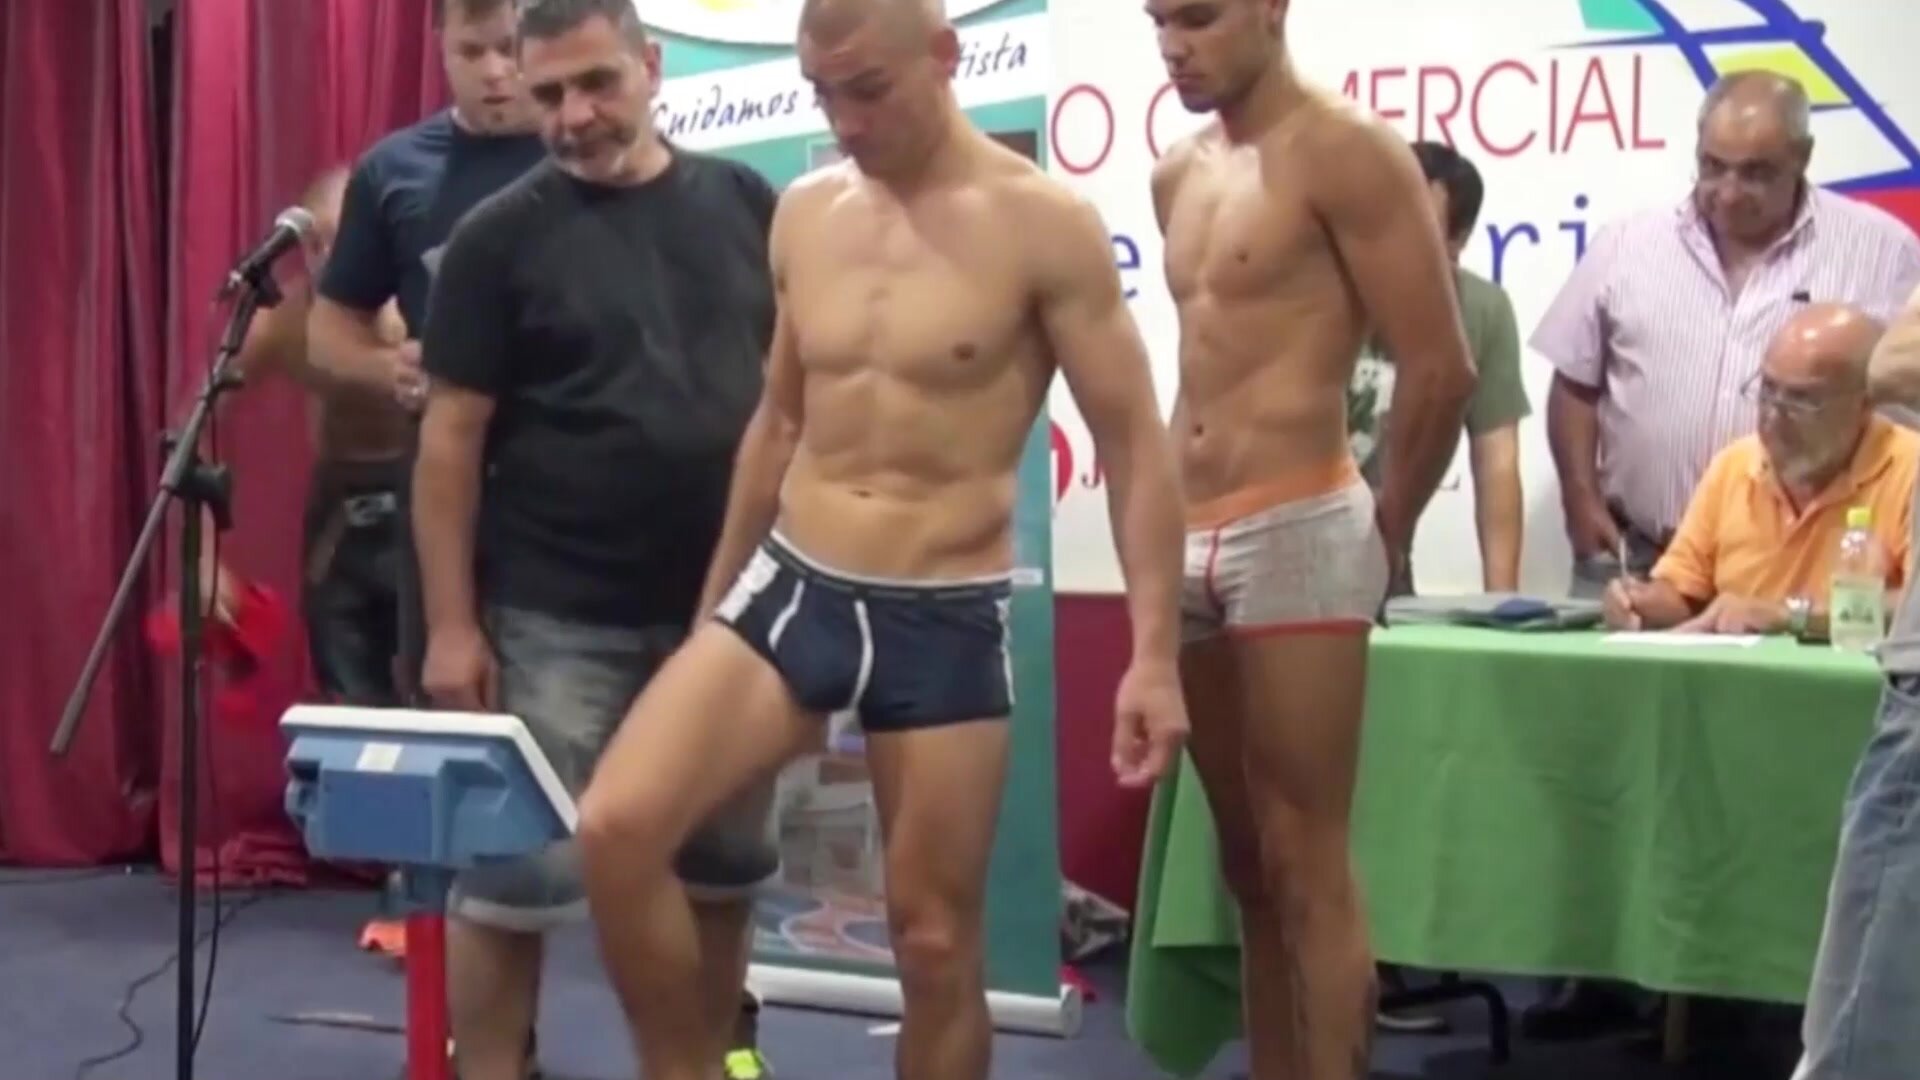 bulging in boxerbriefs at weigh in - blue and white